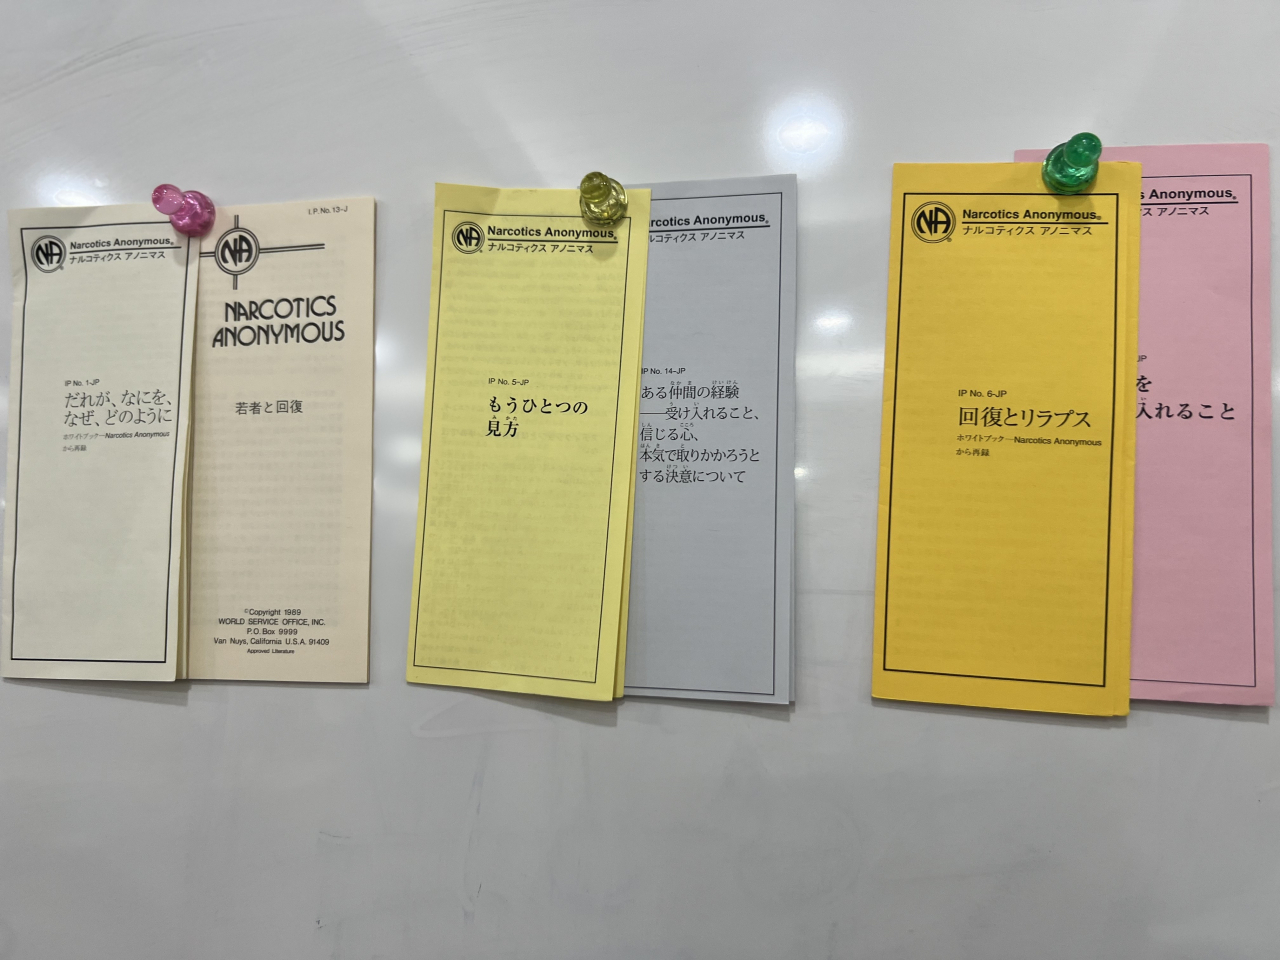 Brochures on Narcotics Anonymous and drug recovery written in Japanese on display at the 19th NA workshop in Seoul, Saturday. (Park Jun-hee/The Korea Herald)